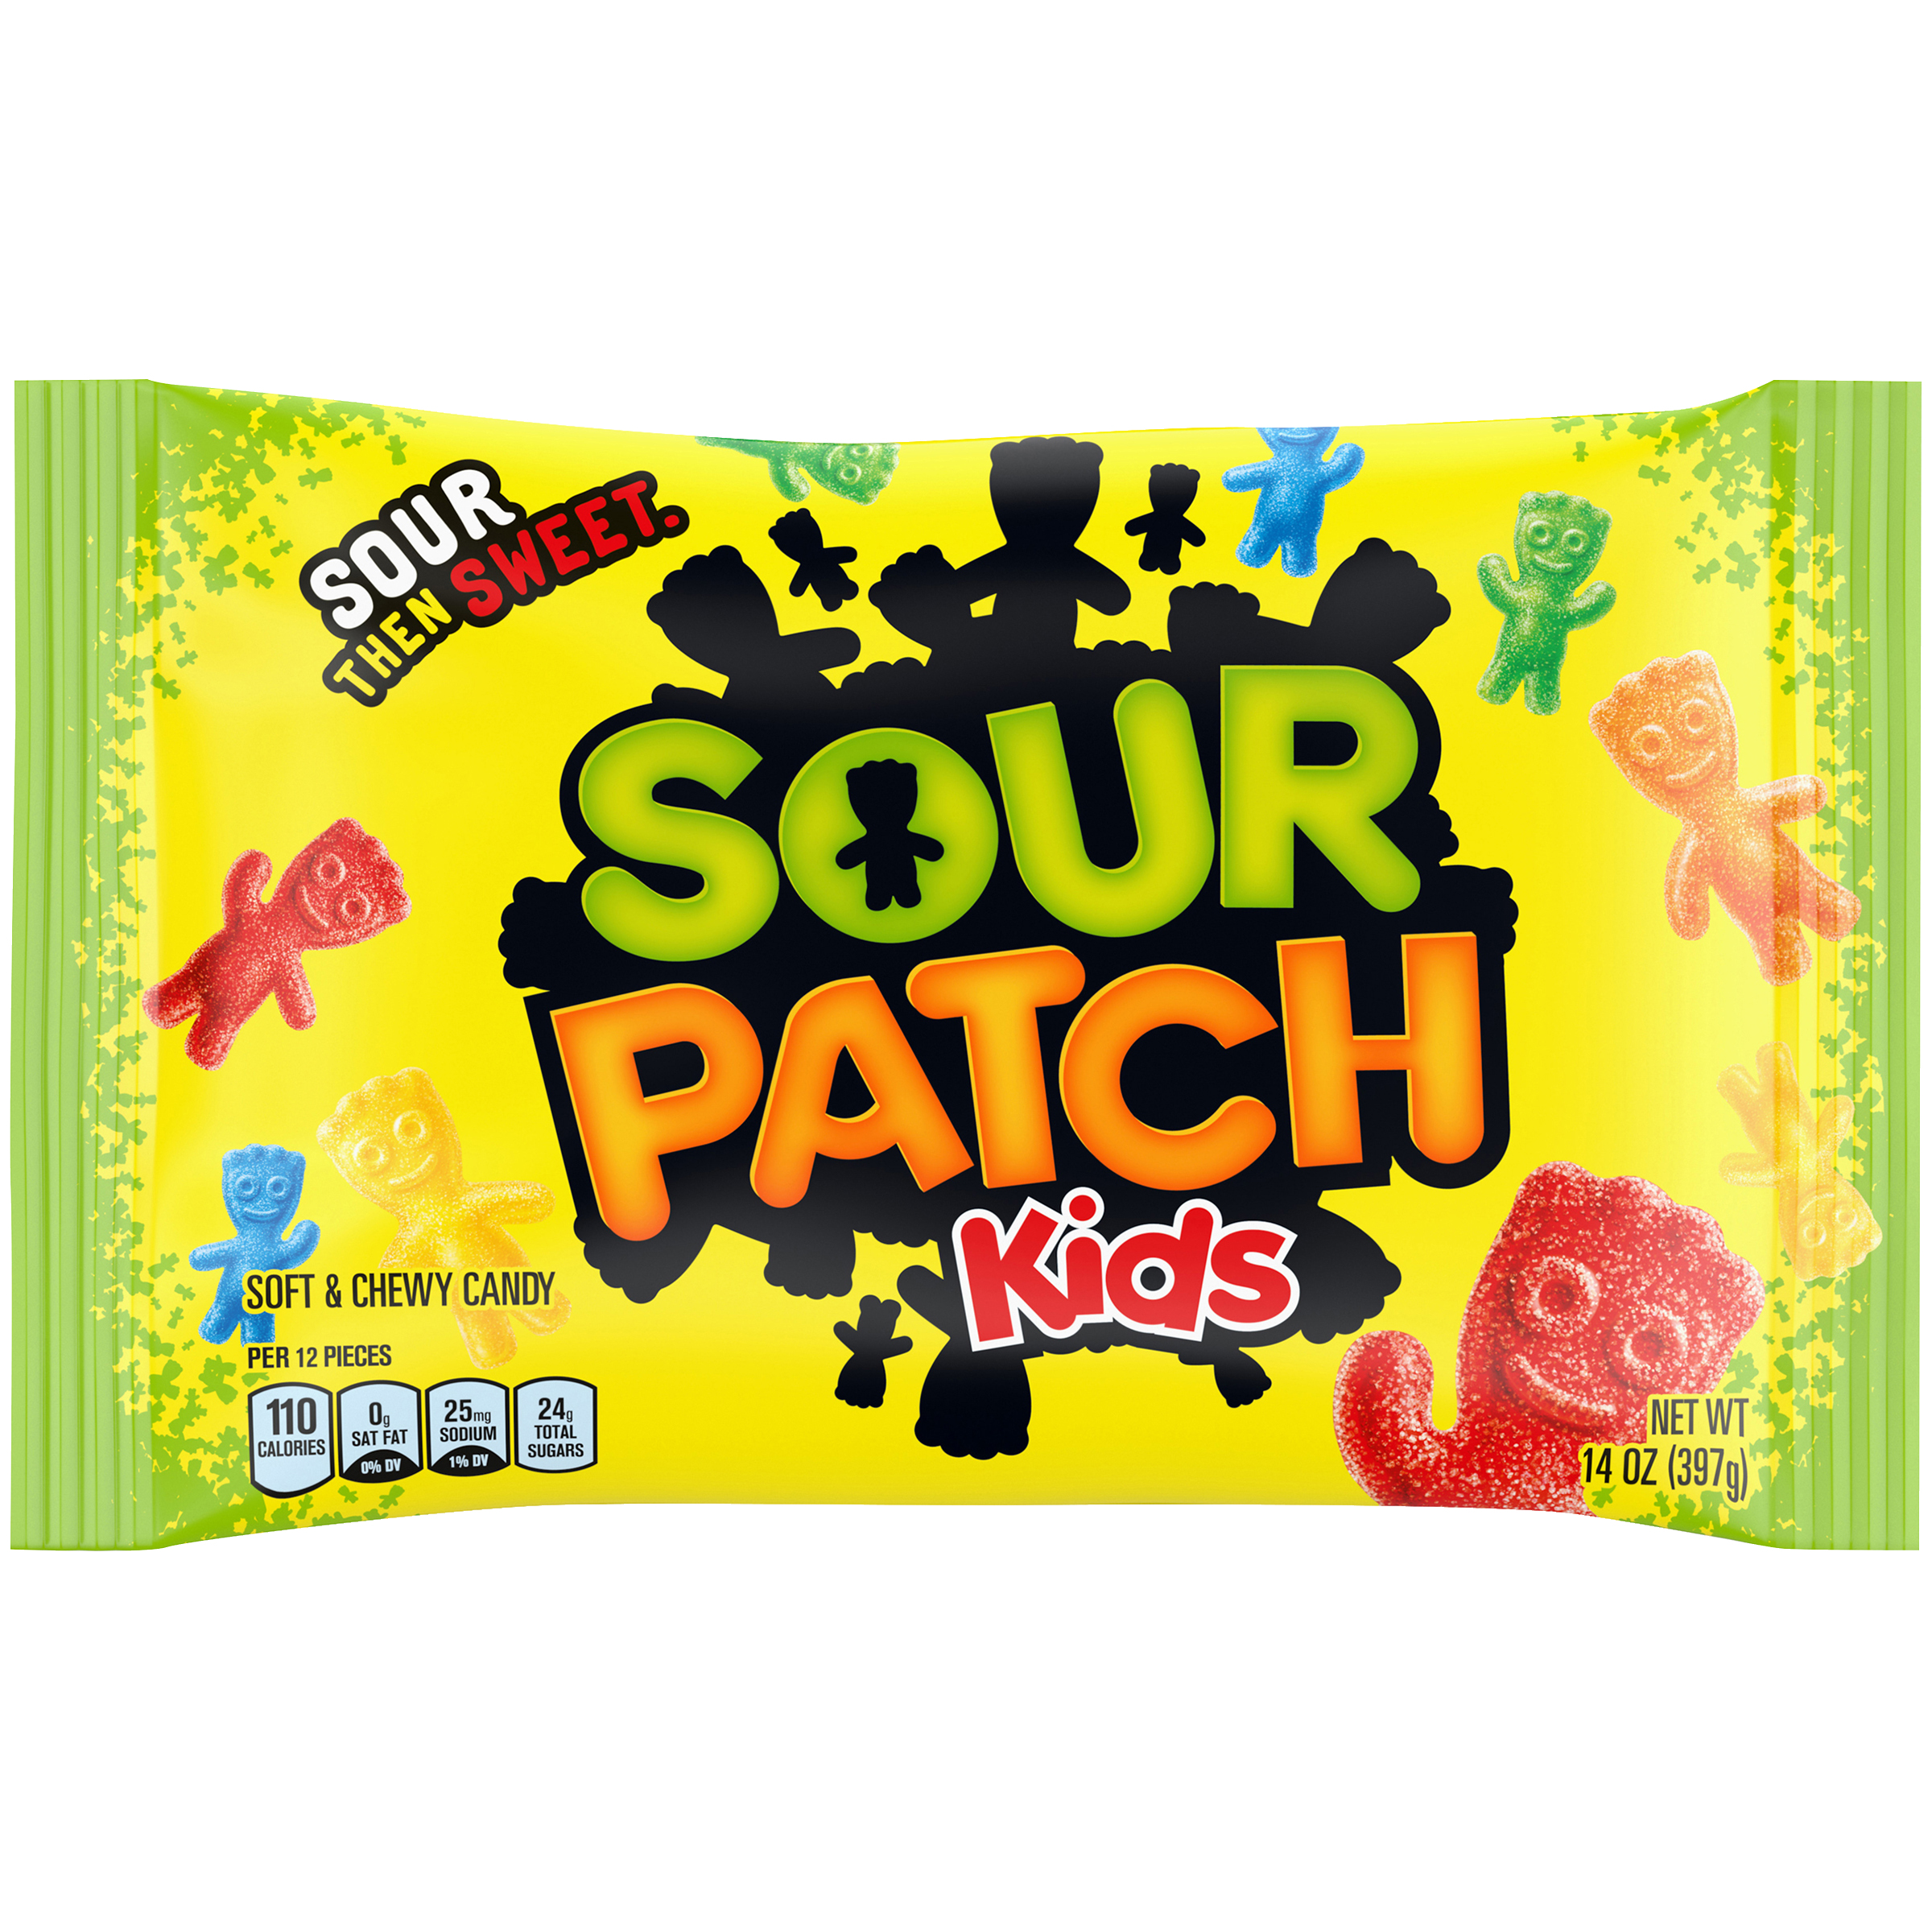 SOUR PATCH KIDS Soft & Chewy Candy, 12- 14oz Bags